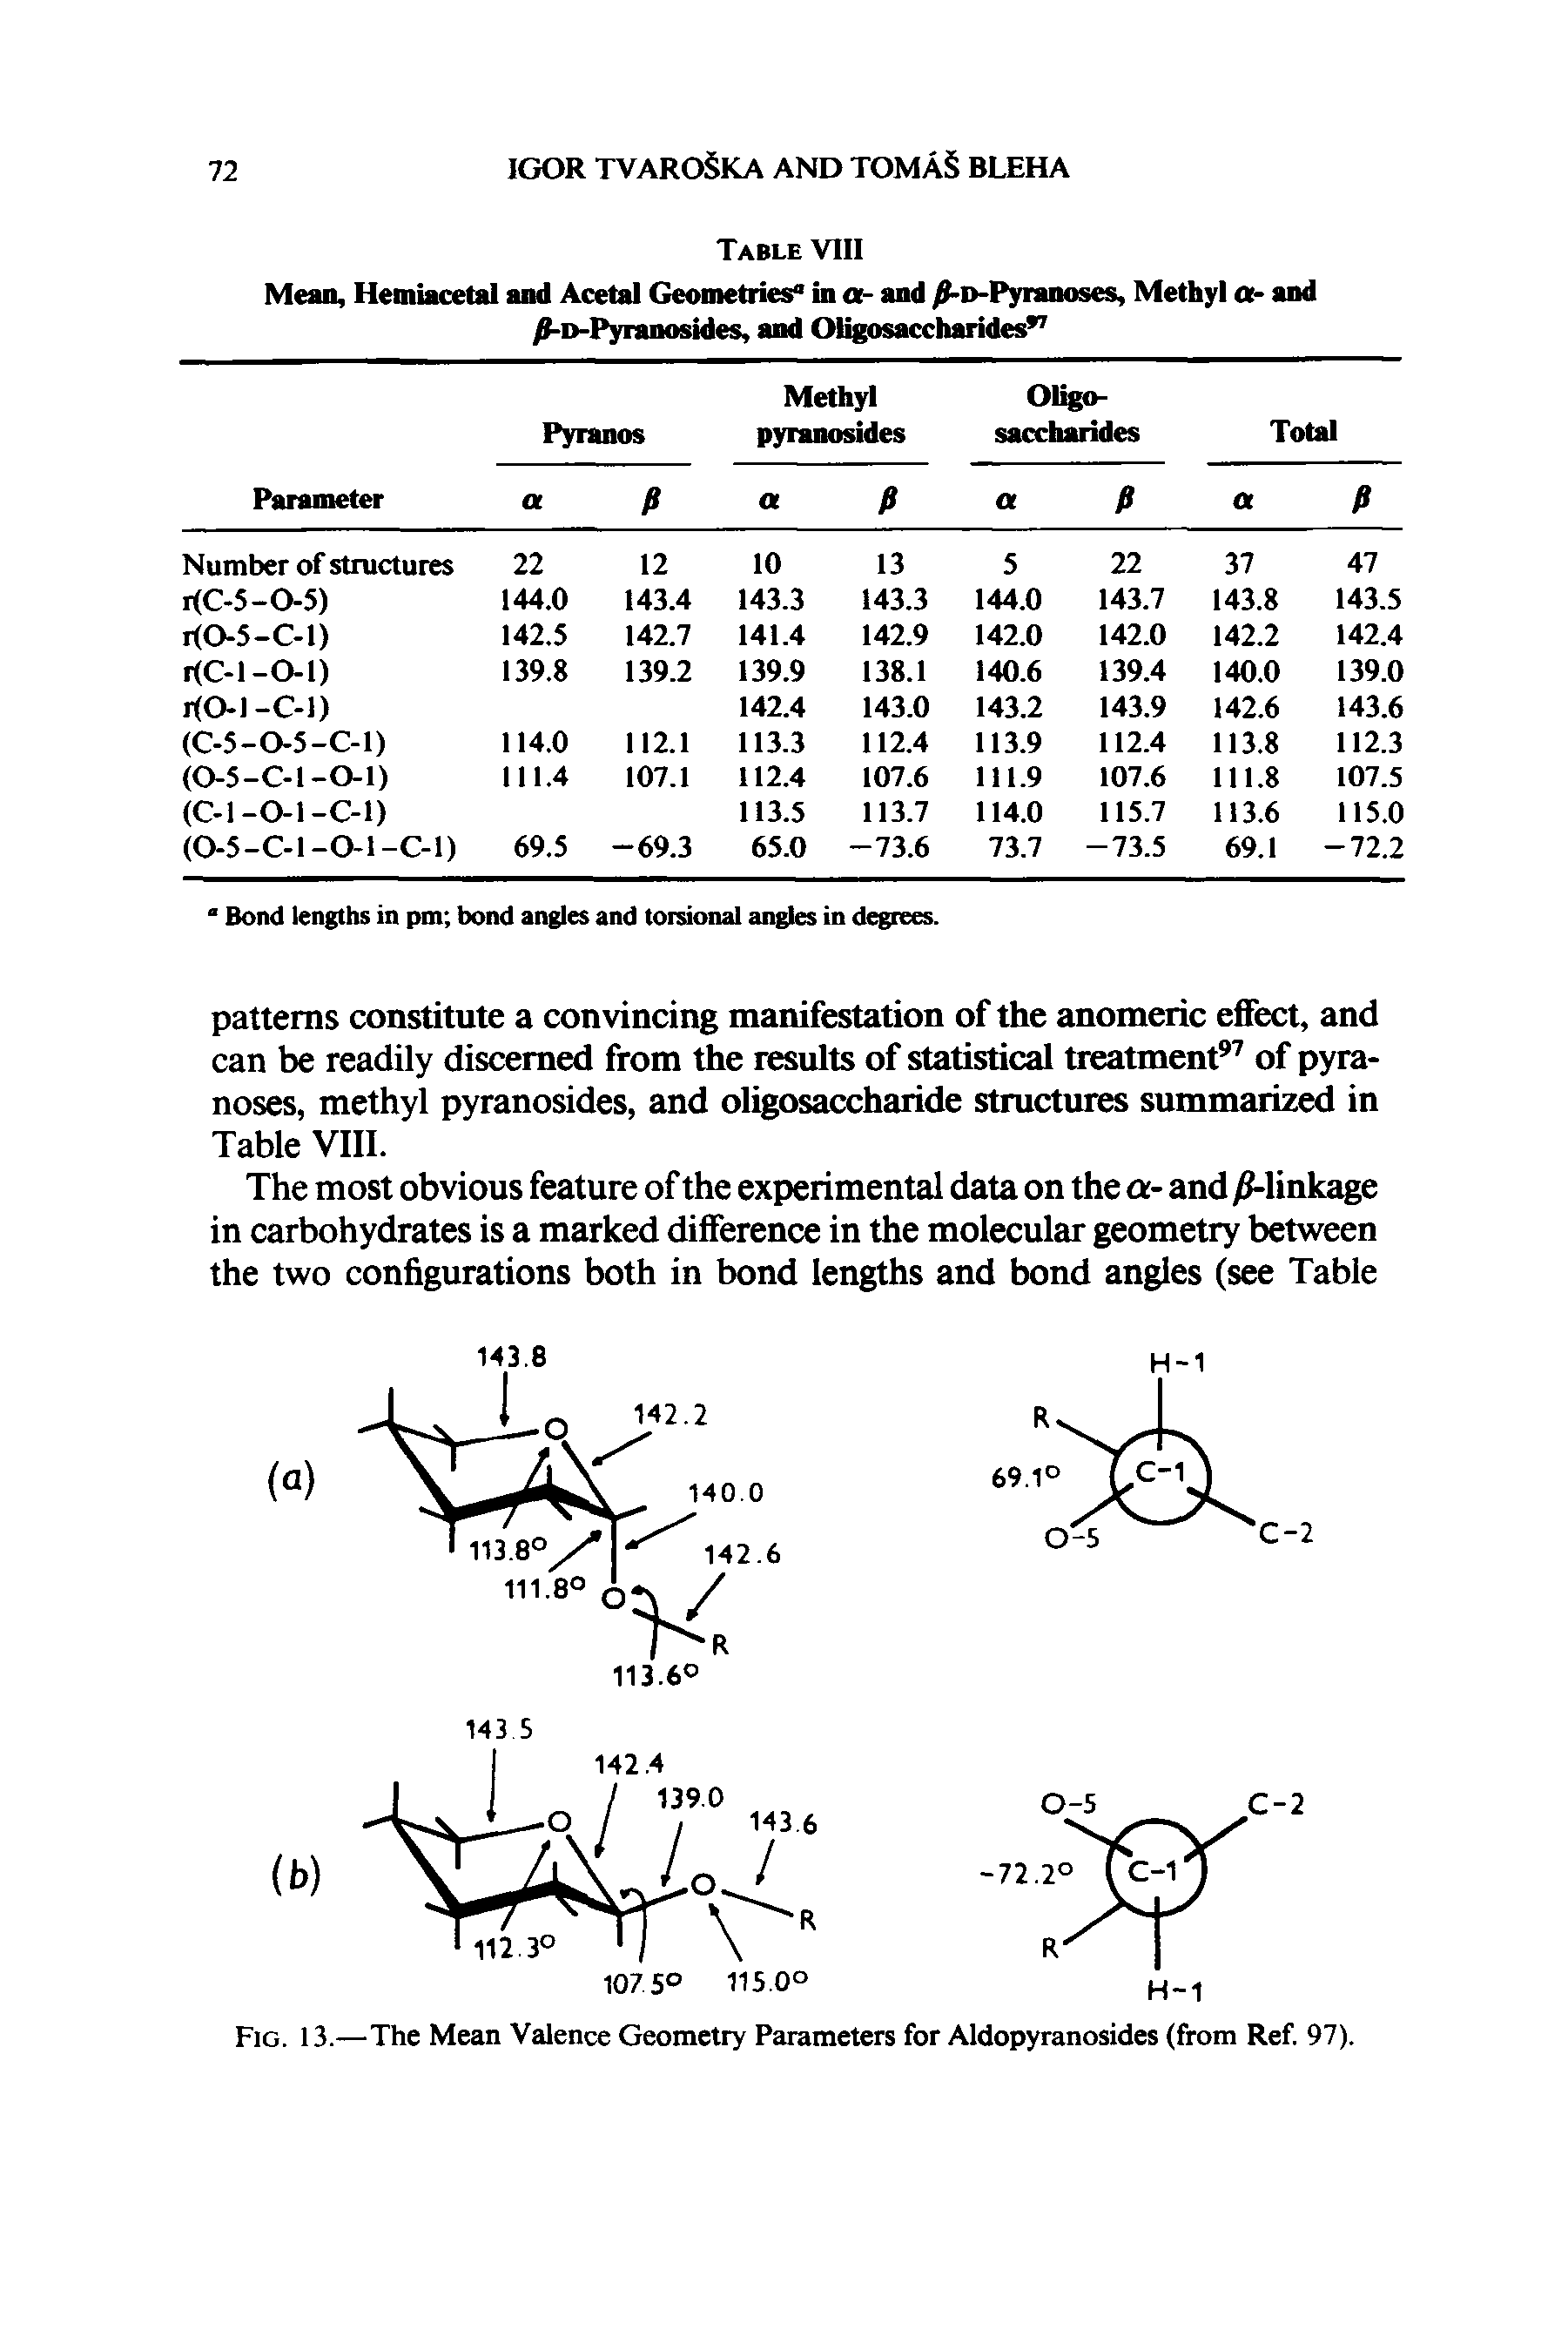 Fig. 13.—The Mean Valence Geometry Parameters for Aldopyranosides (from Ref. 97).